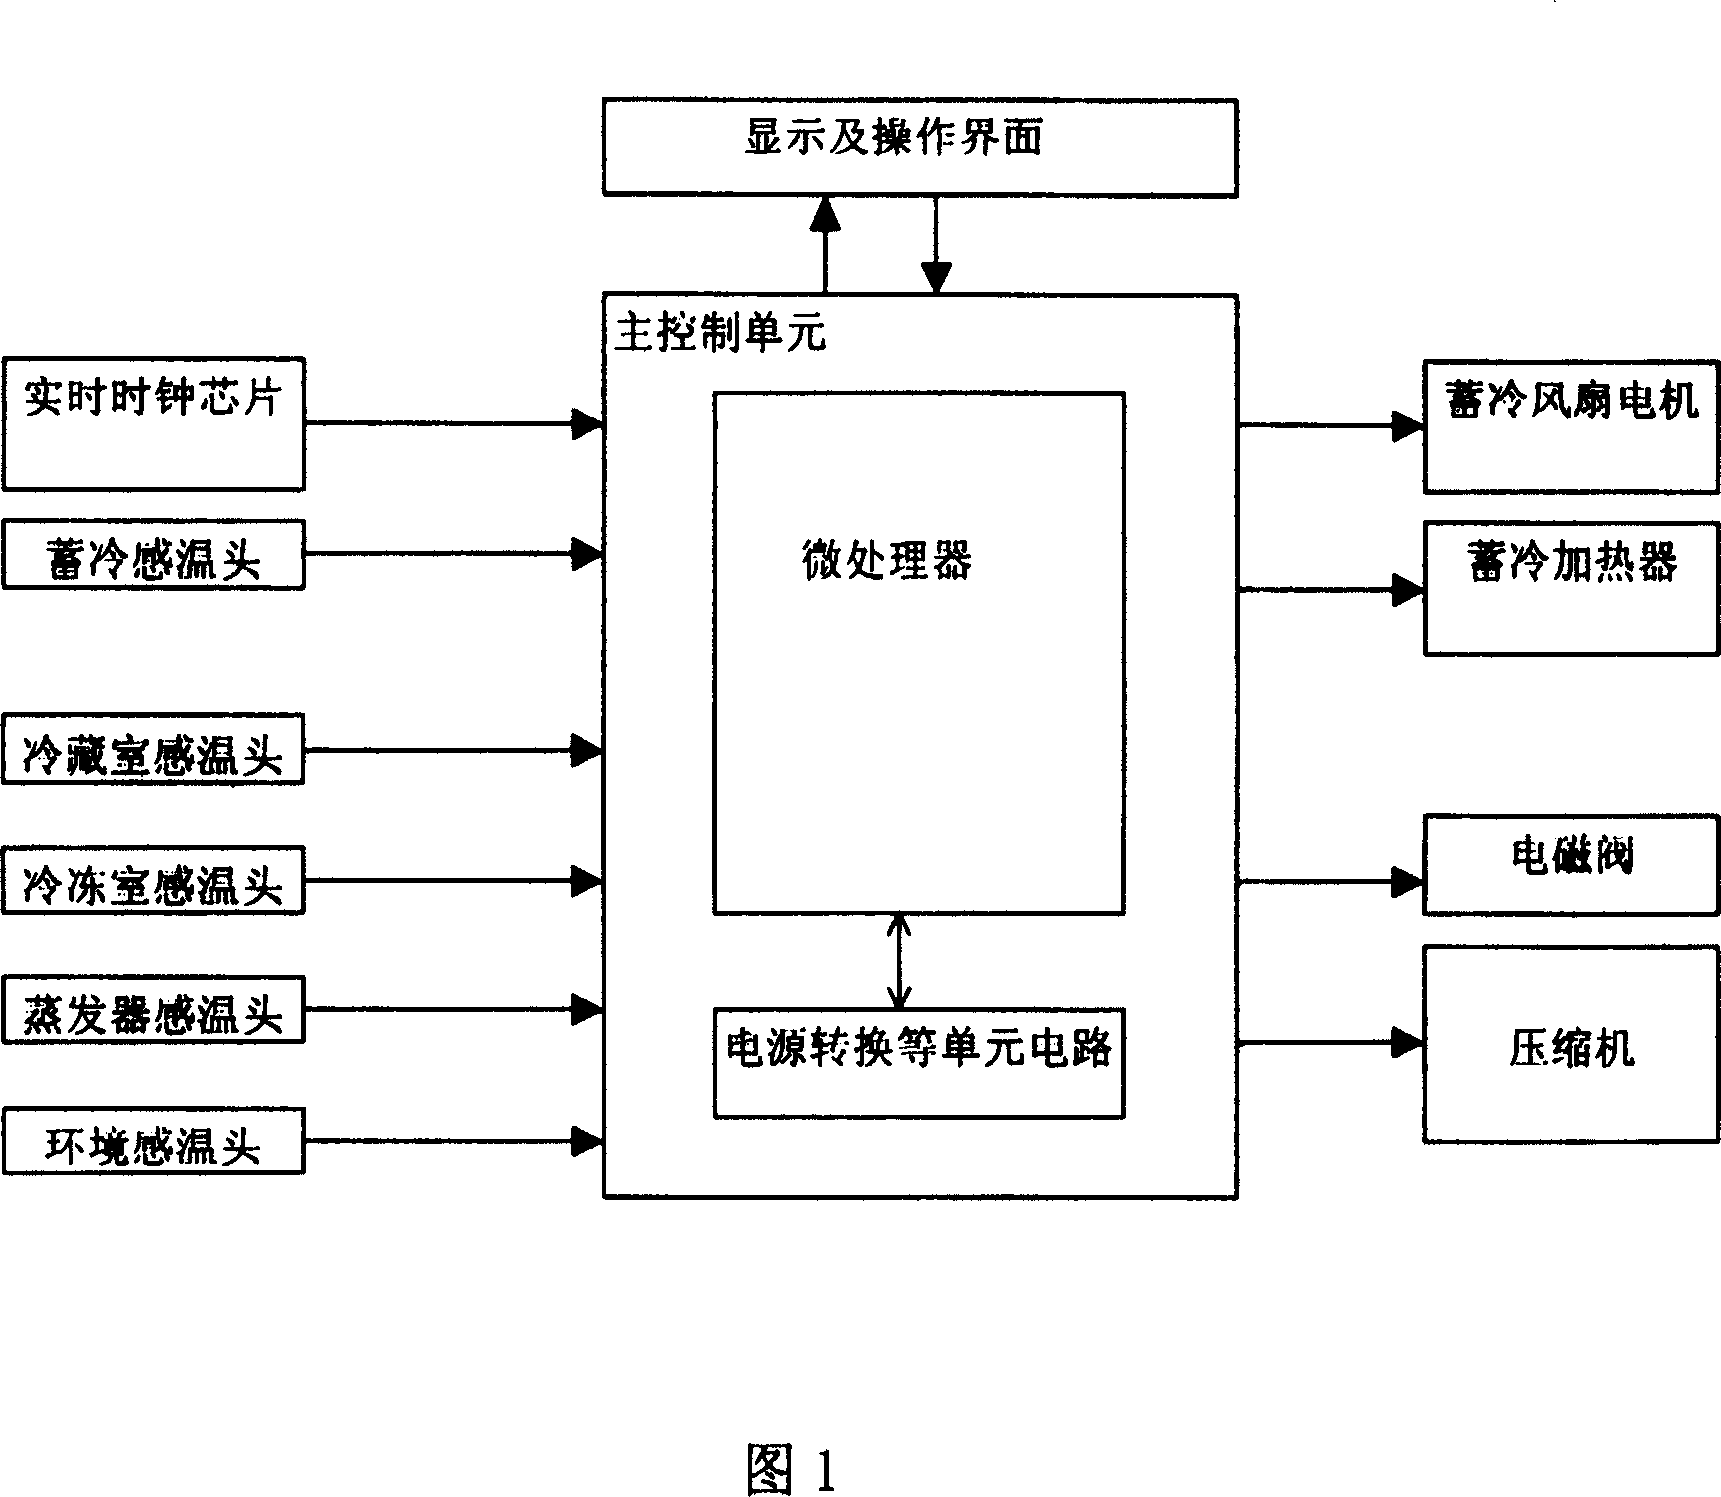 Controlling system and method for refrigerator with time interval run